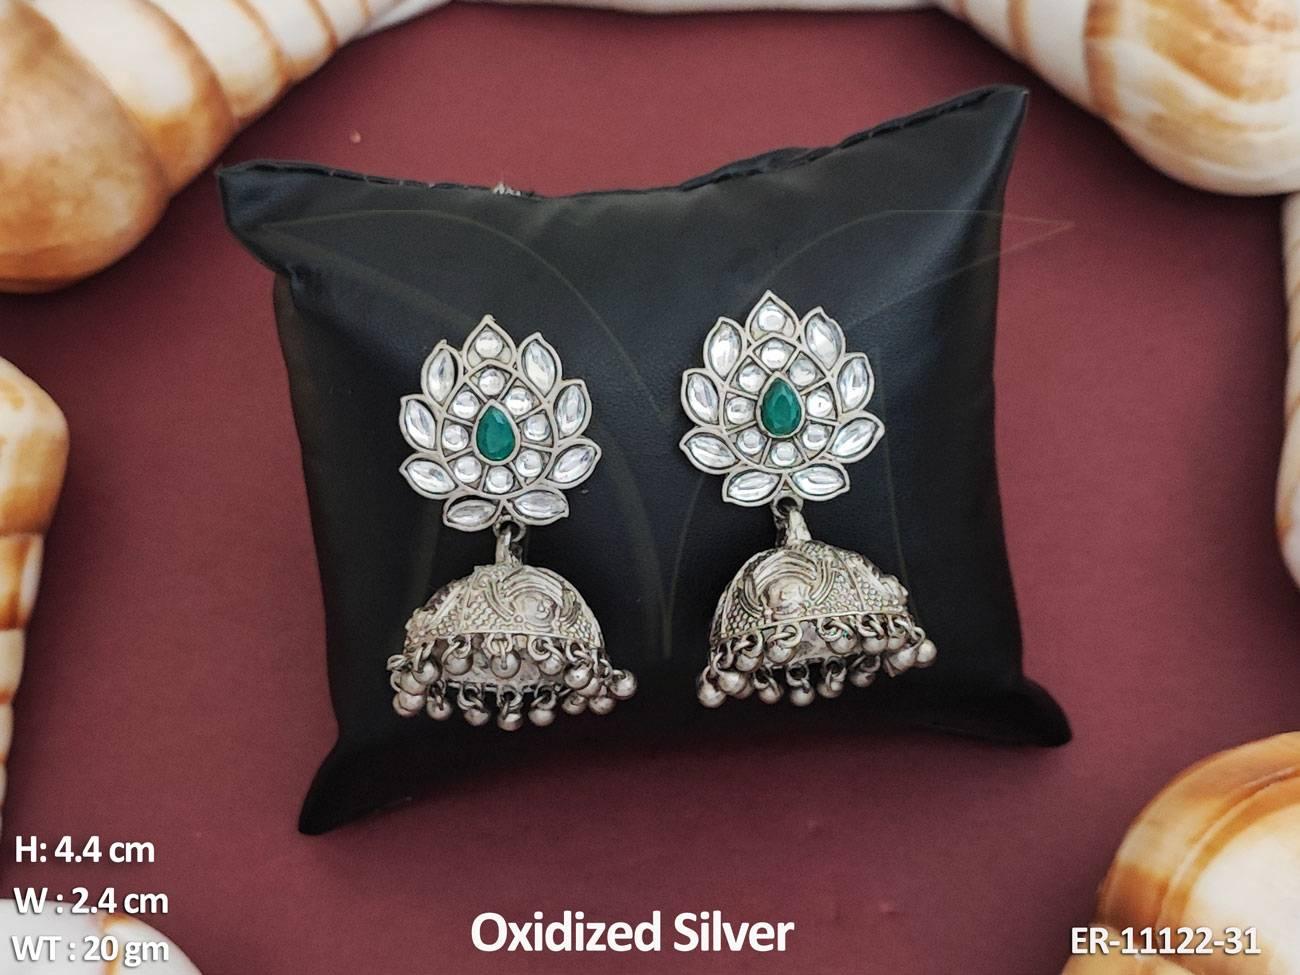 Perfect for any special occasion, these earrings are a must-have for any fashion-conscious individual.